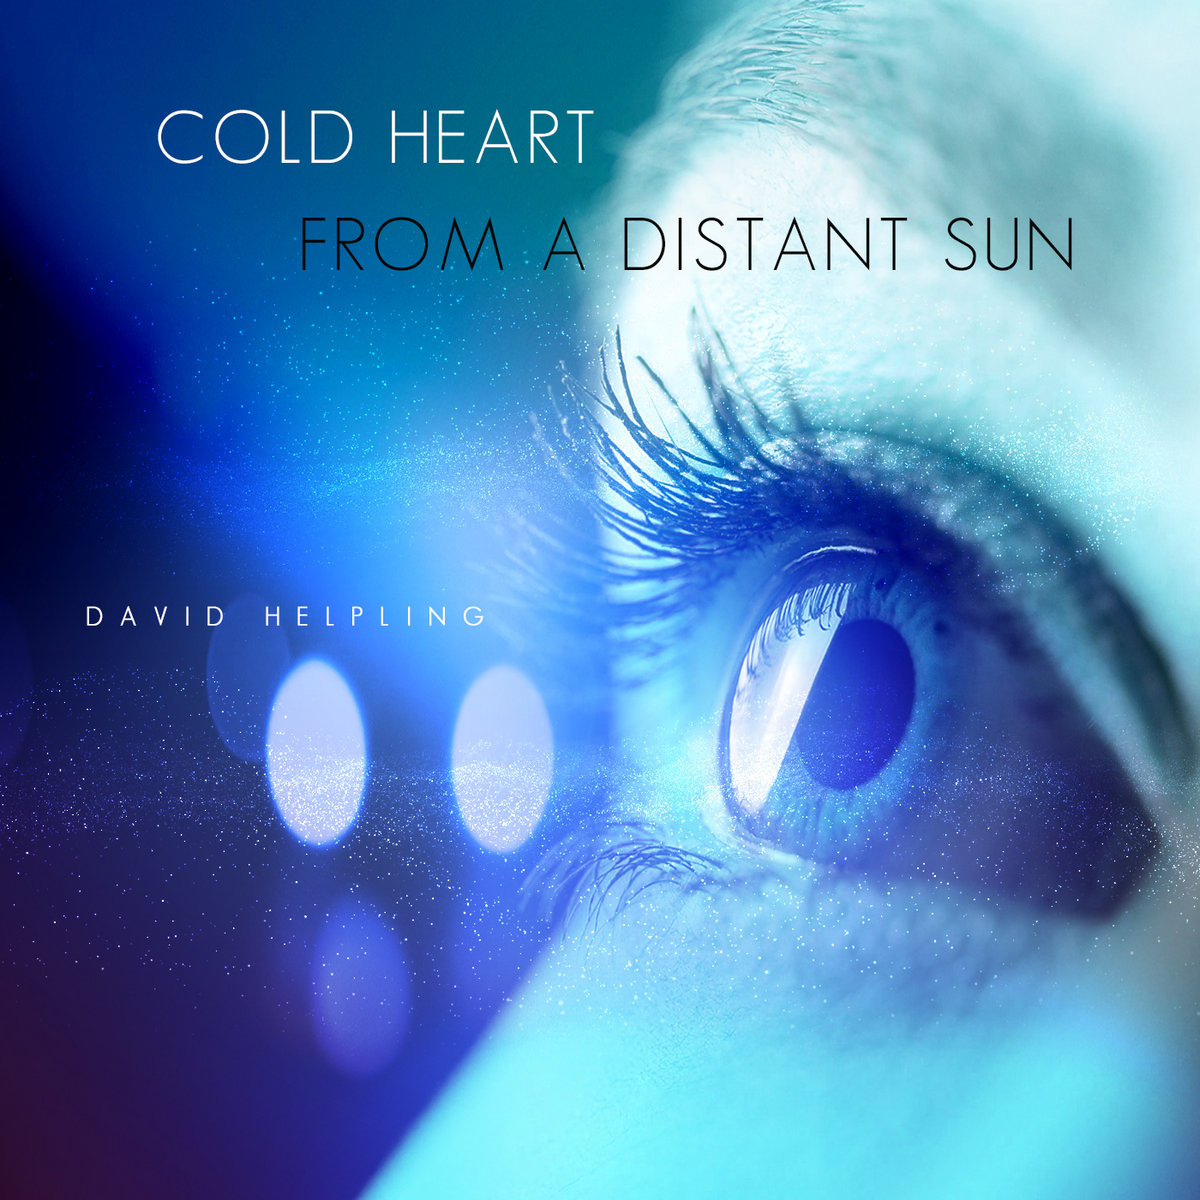 COLD HEART FROM A DISTANT SUN